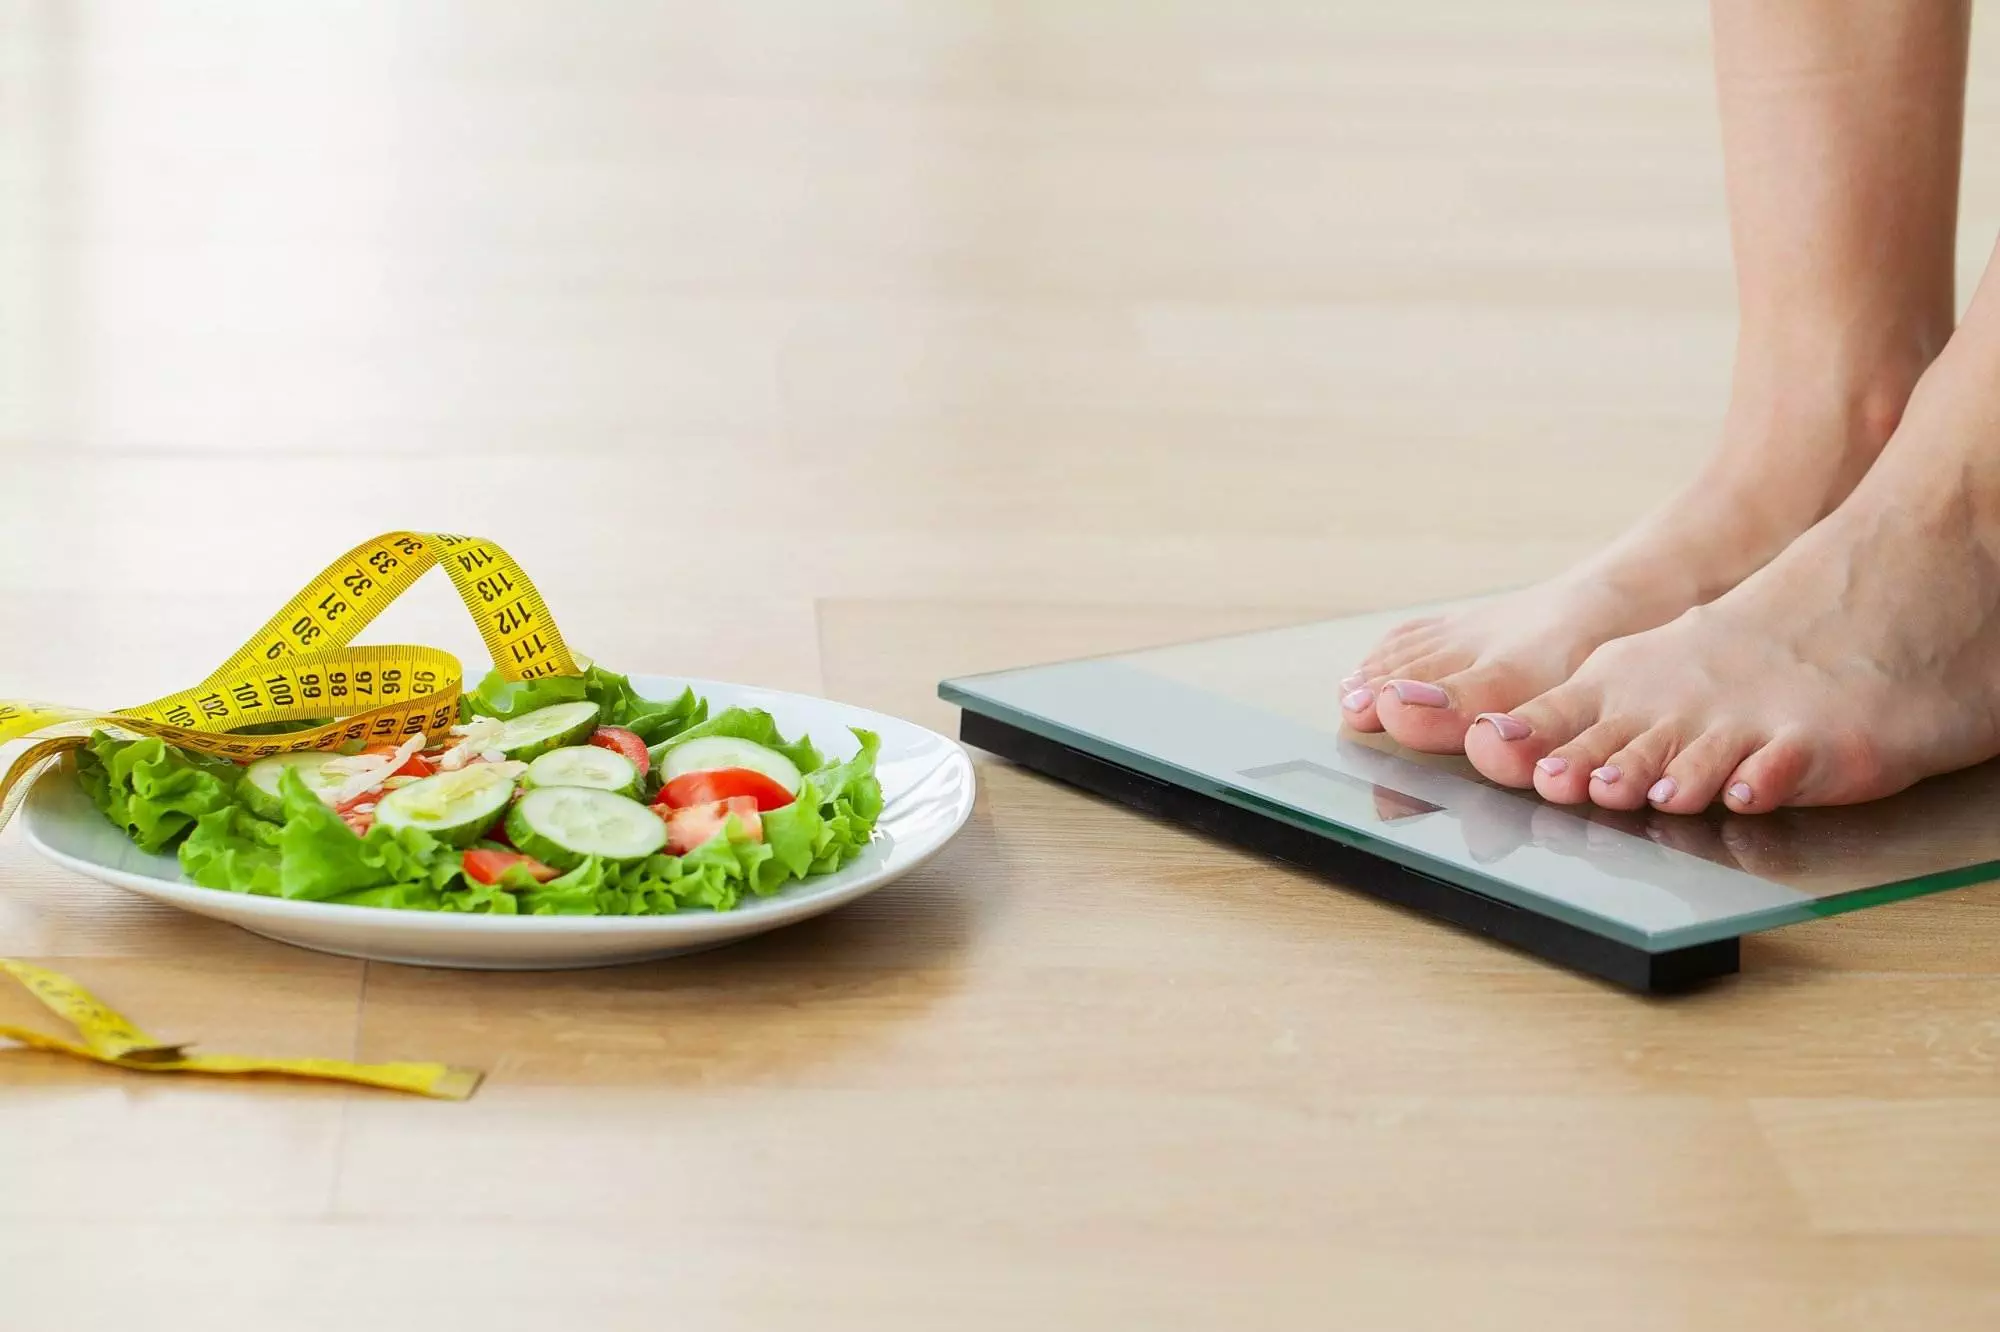 Healthy eating with salad and measuring tape.